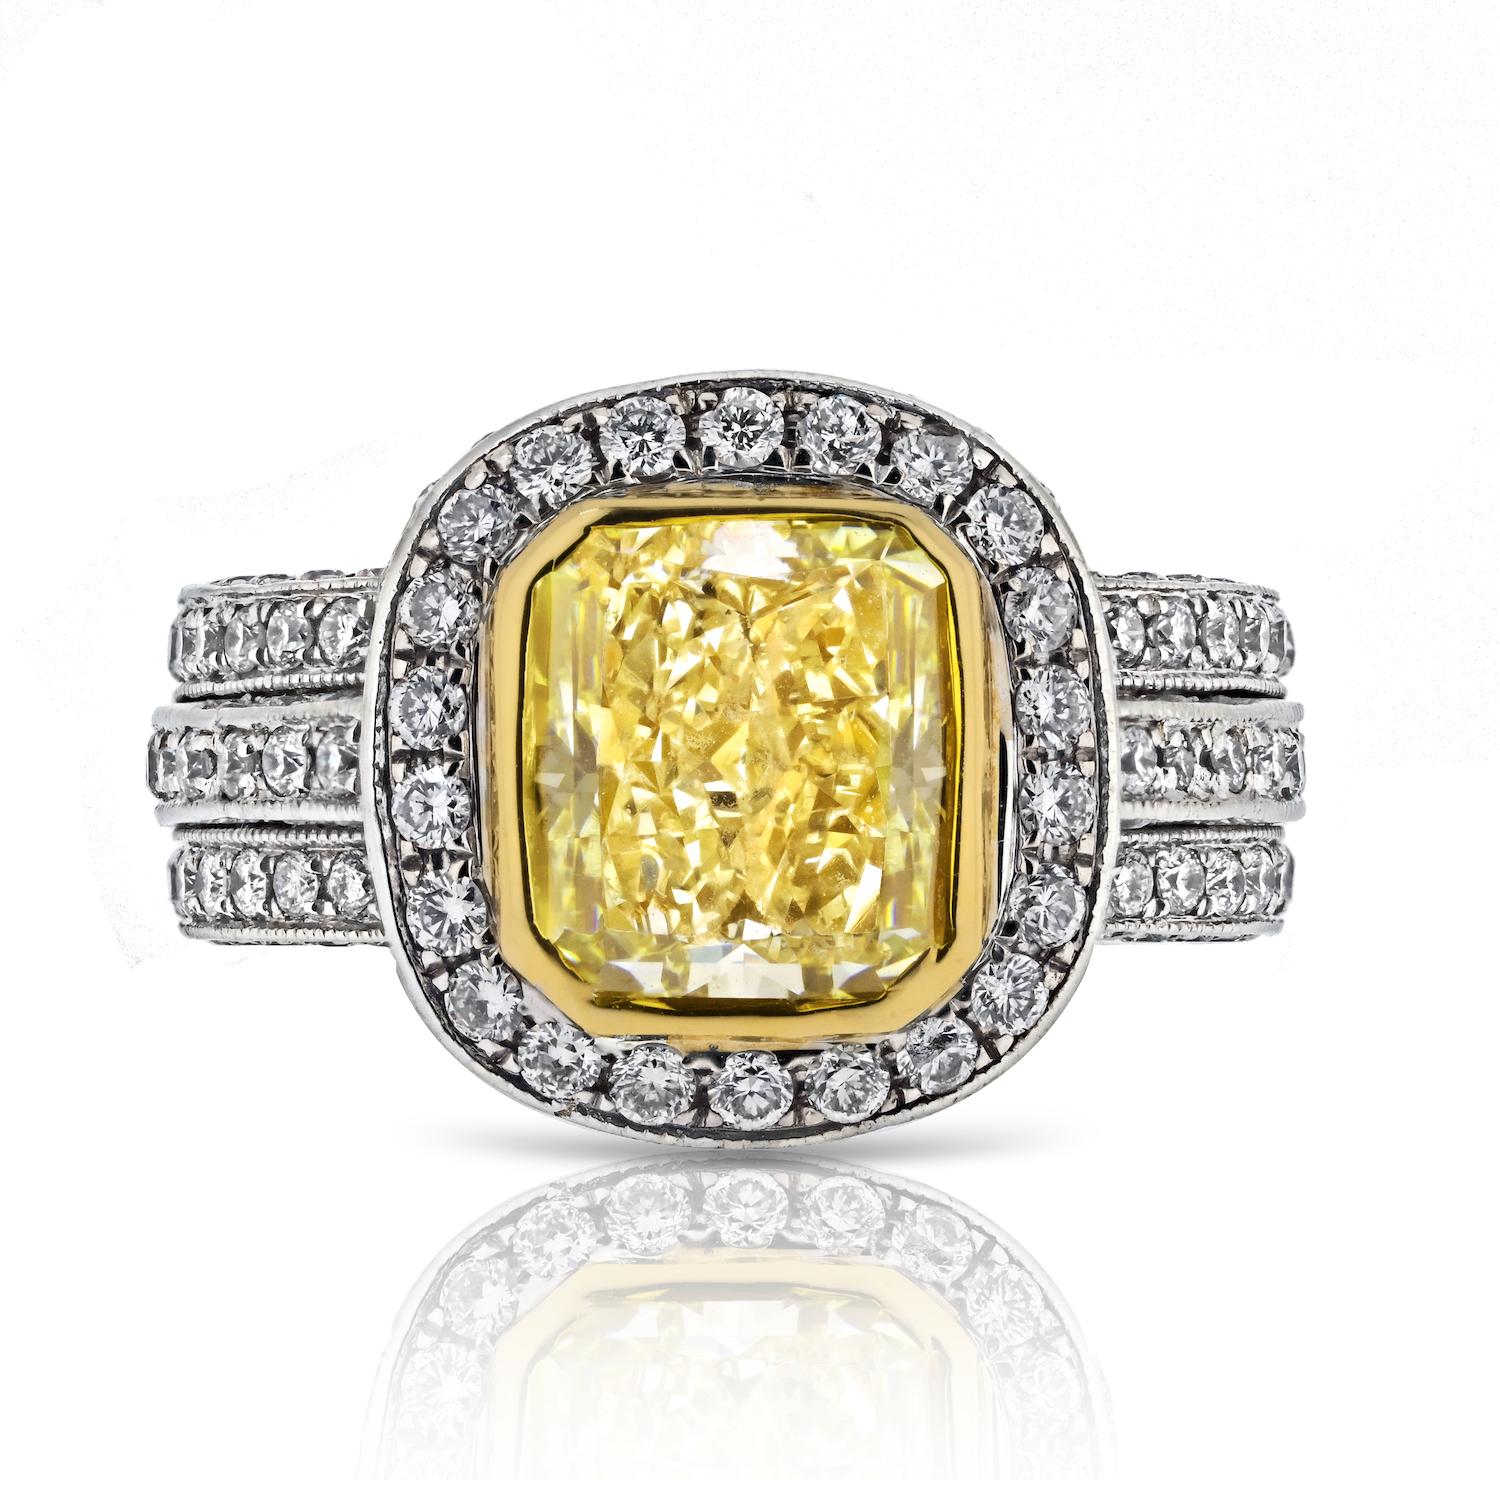 Elevate your love story with this exquisite 2.53-carat Light Fancy Yellow Diamond Engagement Ring, a radiant testament to superior craftsmanship and timeless elegance. 

The centerpiece, a GIA-certified 2.53ct Fancy Light Yellow radiant cut diamond